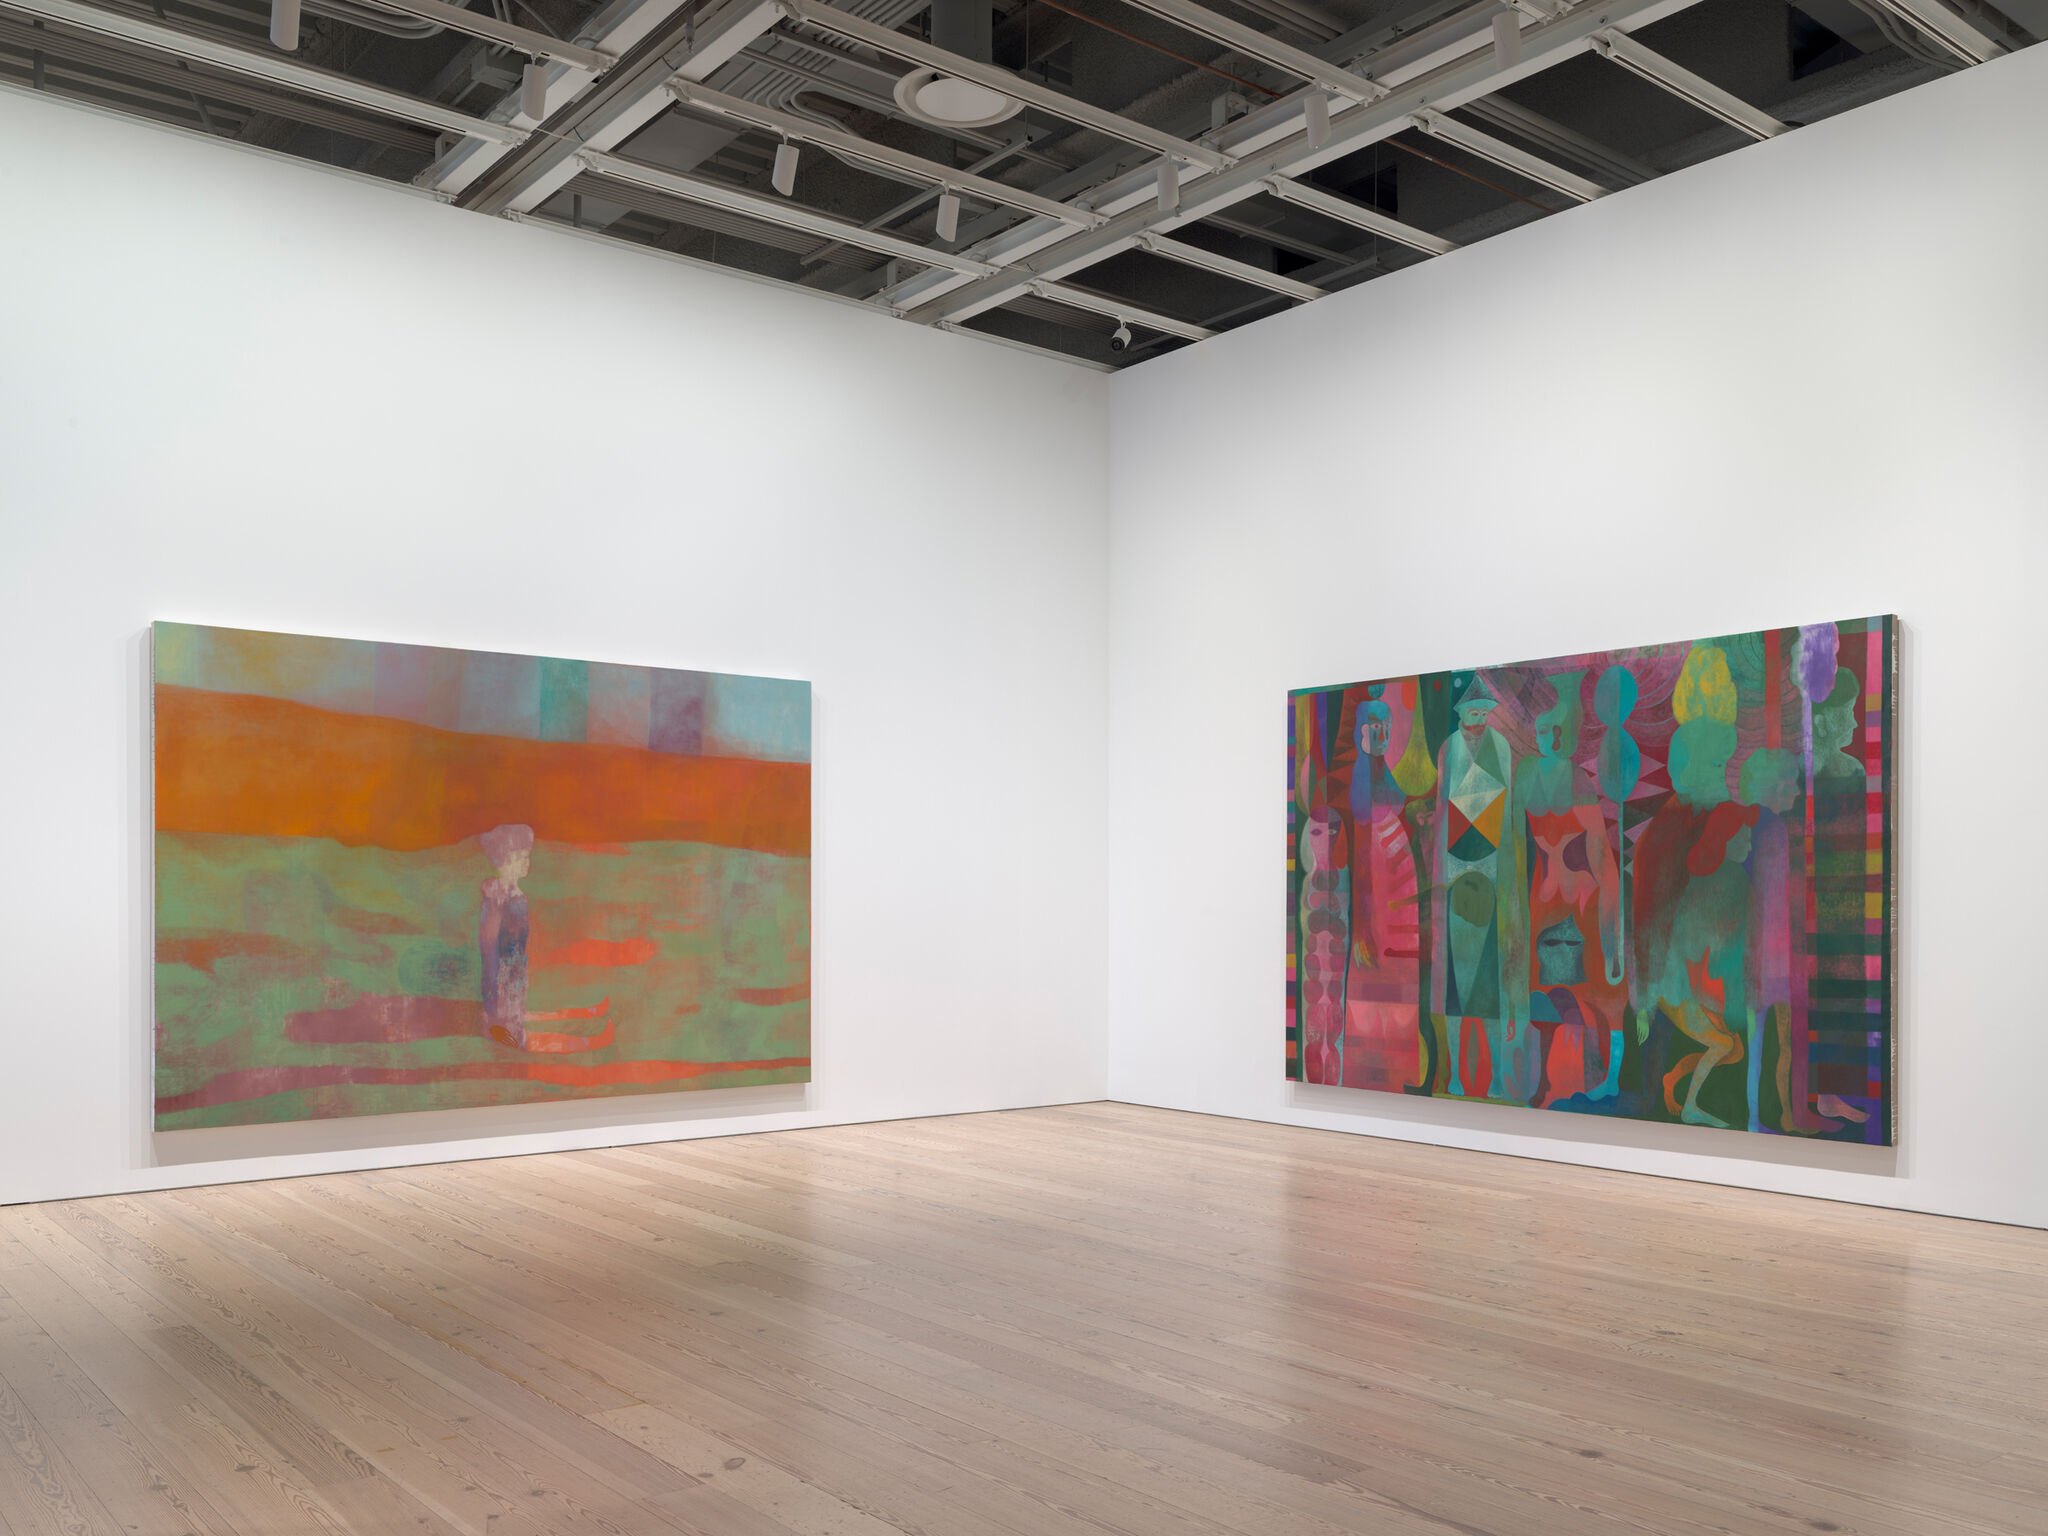 Two large paintings hang on white walls in a modern gallery. The left painting features warm tones, while the right painting has vibrant, multicolored figures.